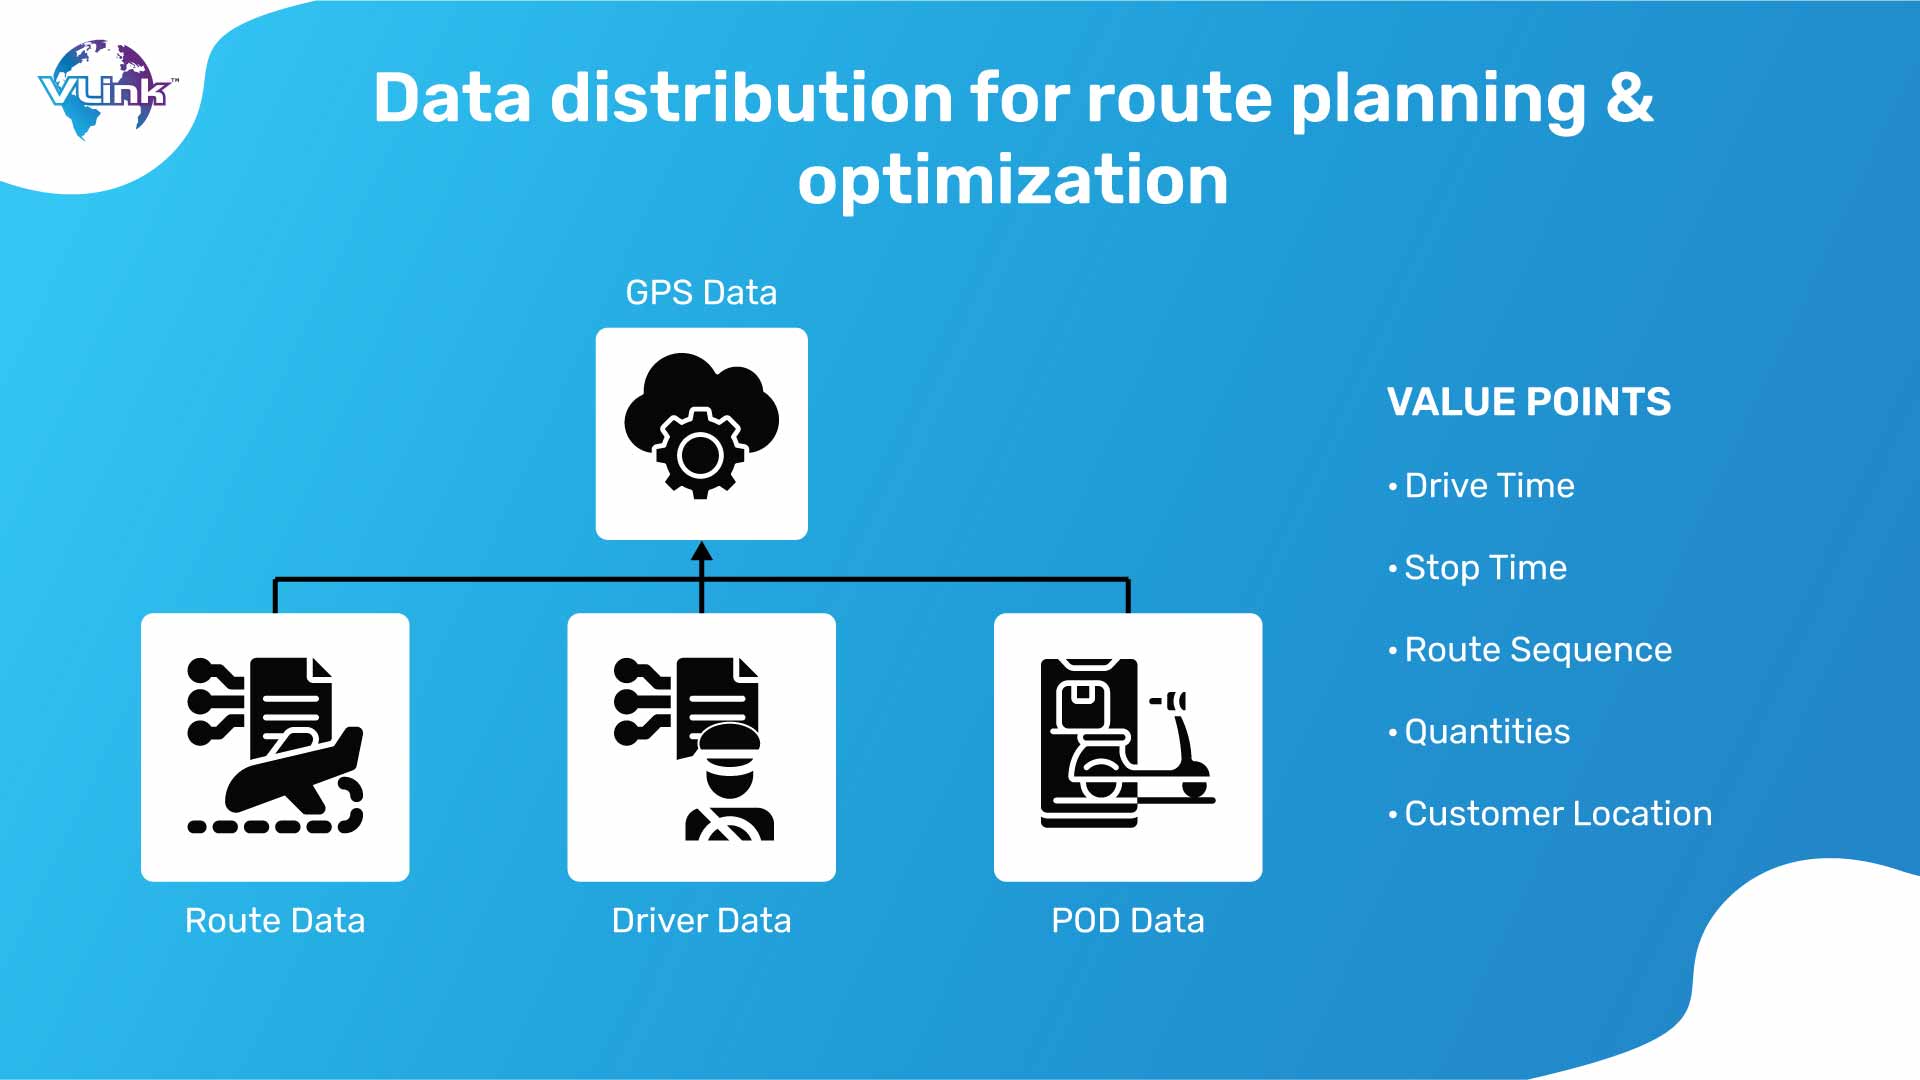 Data distribution for route planning & optimization